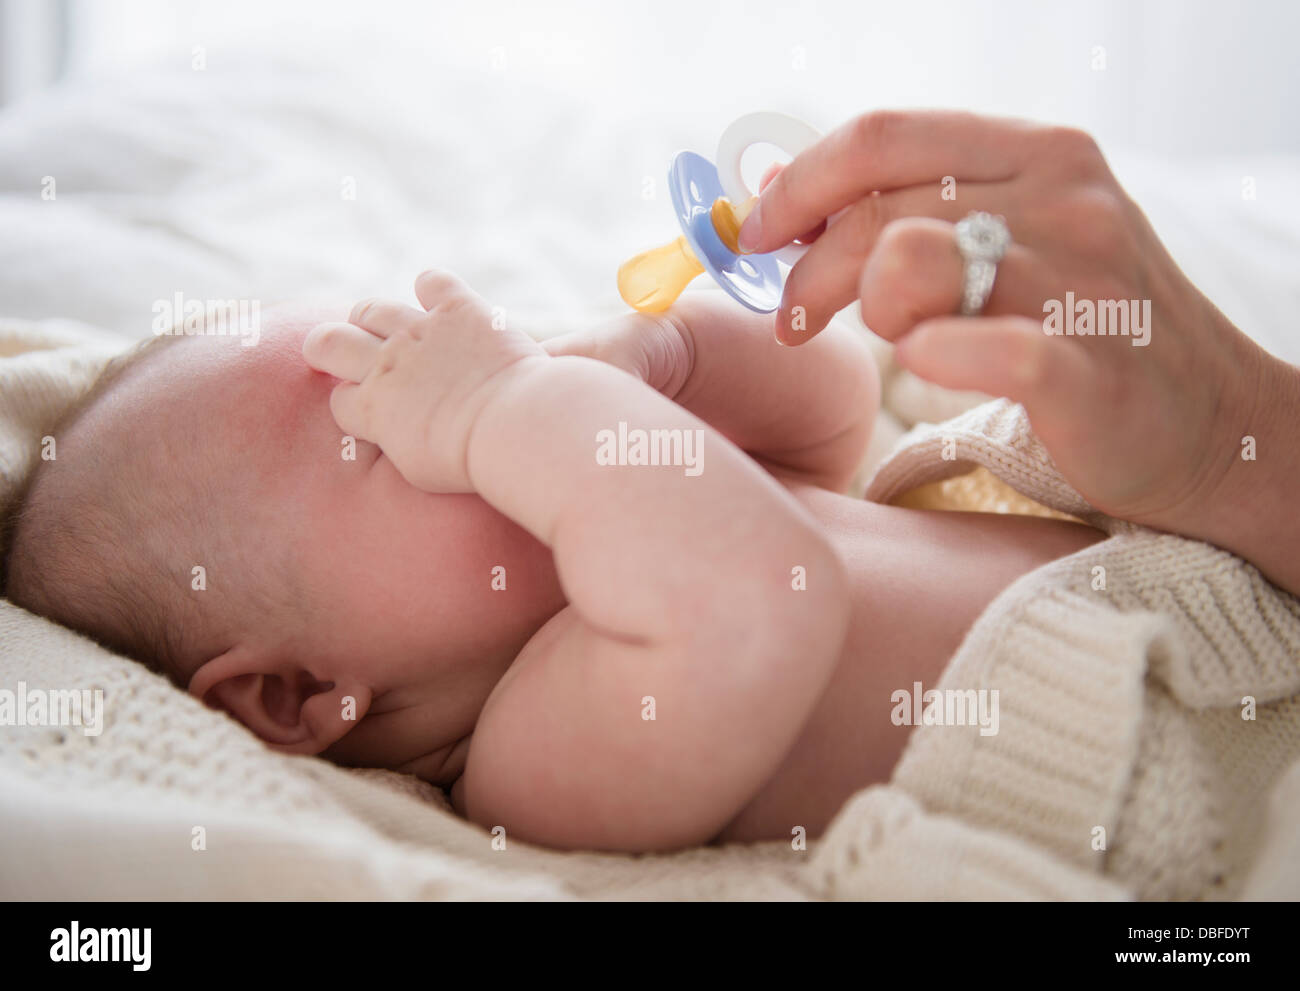 Caucasian mother giving baby pacifier Stock Photo